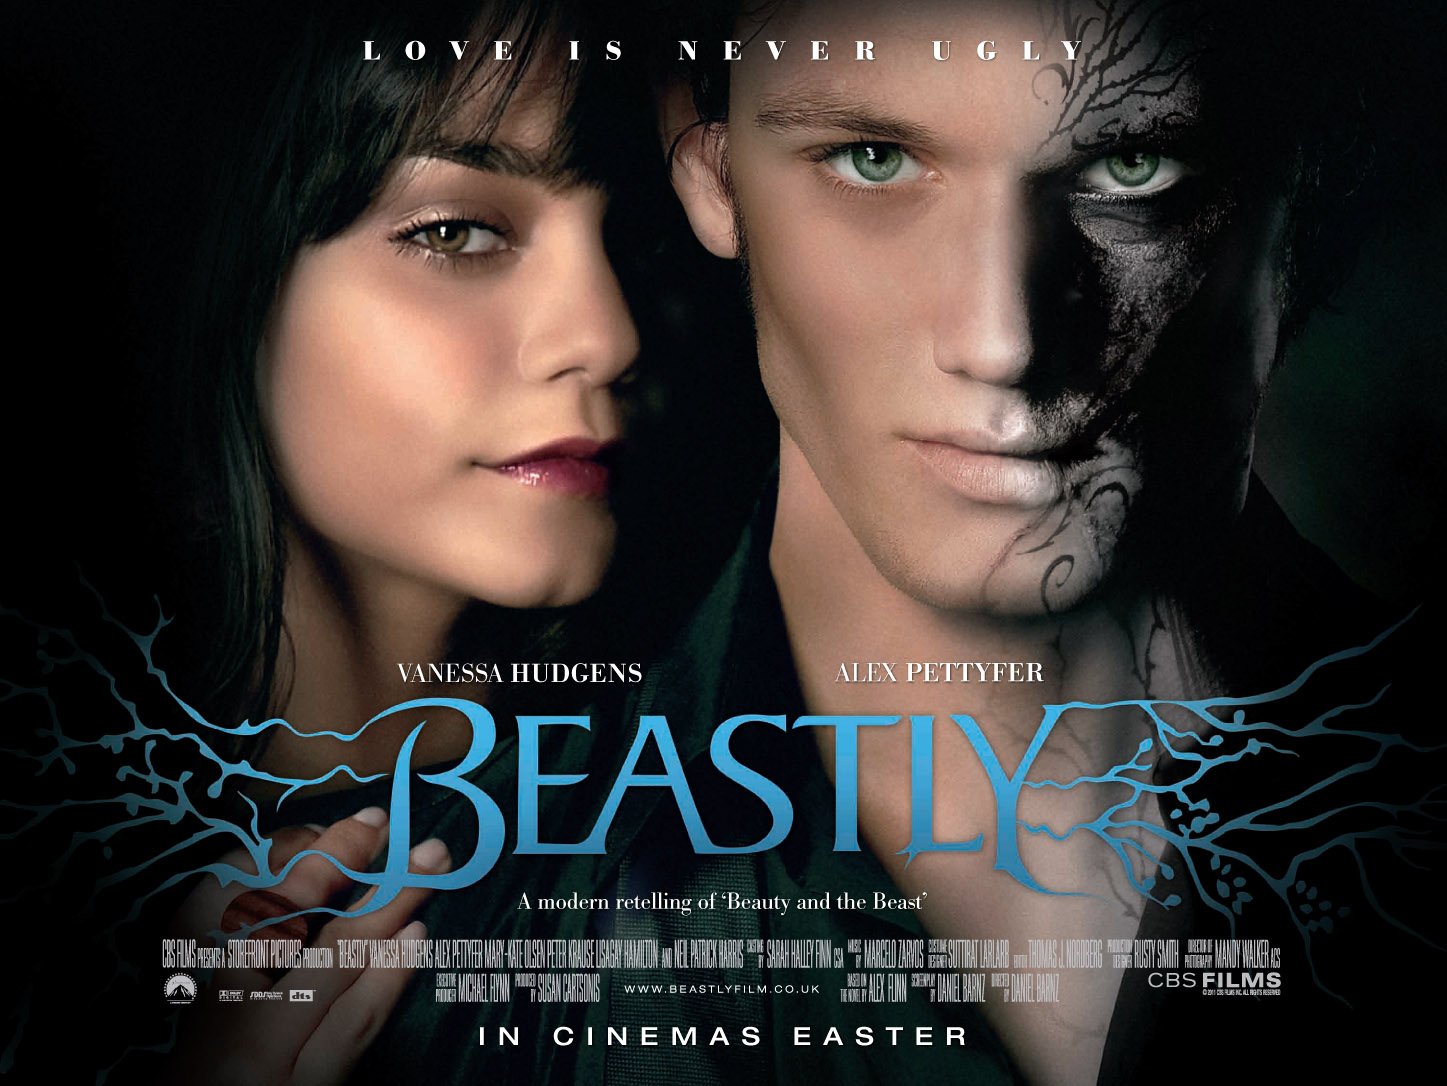 Extra Large Movie Poster Image for Beastly (#4 of 4)